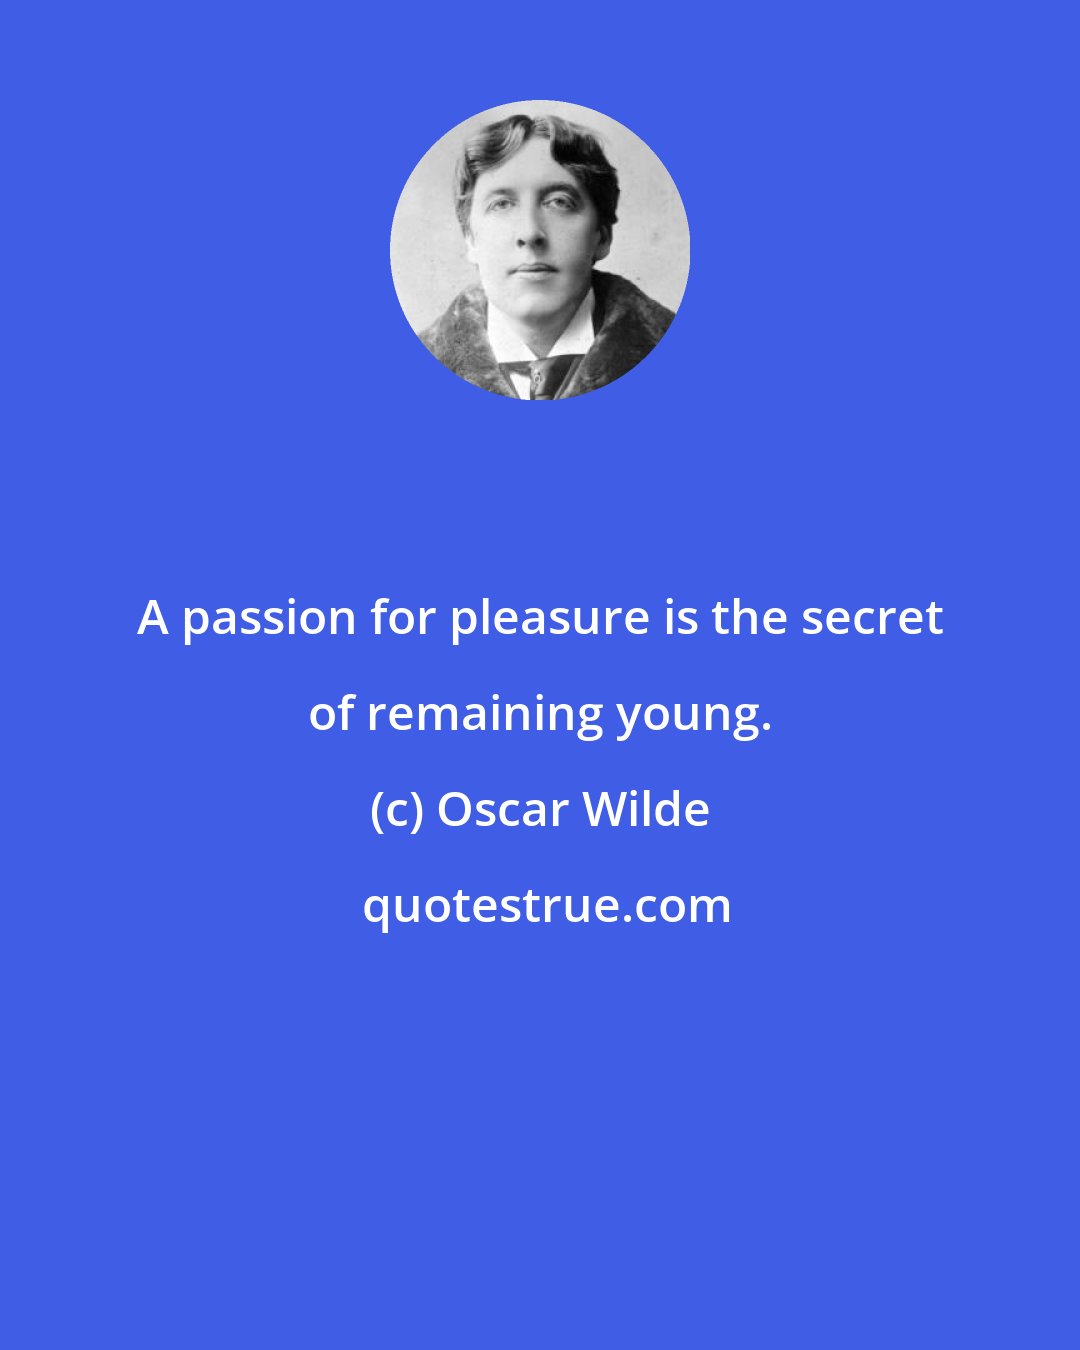 Oscar Wilde: A passion for pleasure is the secret of remaining young.